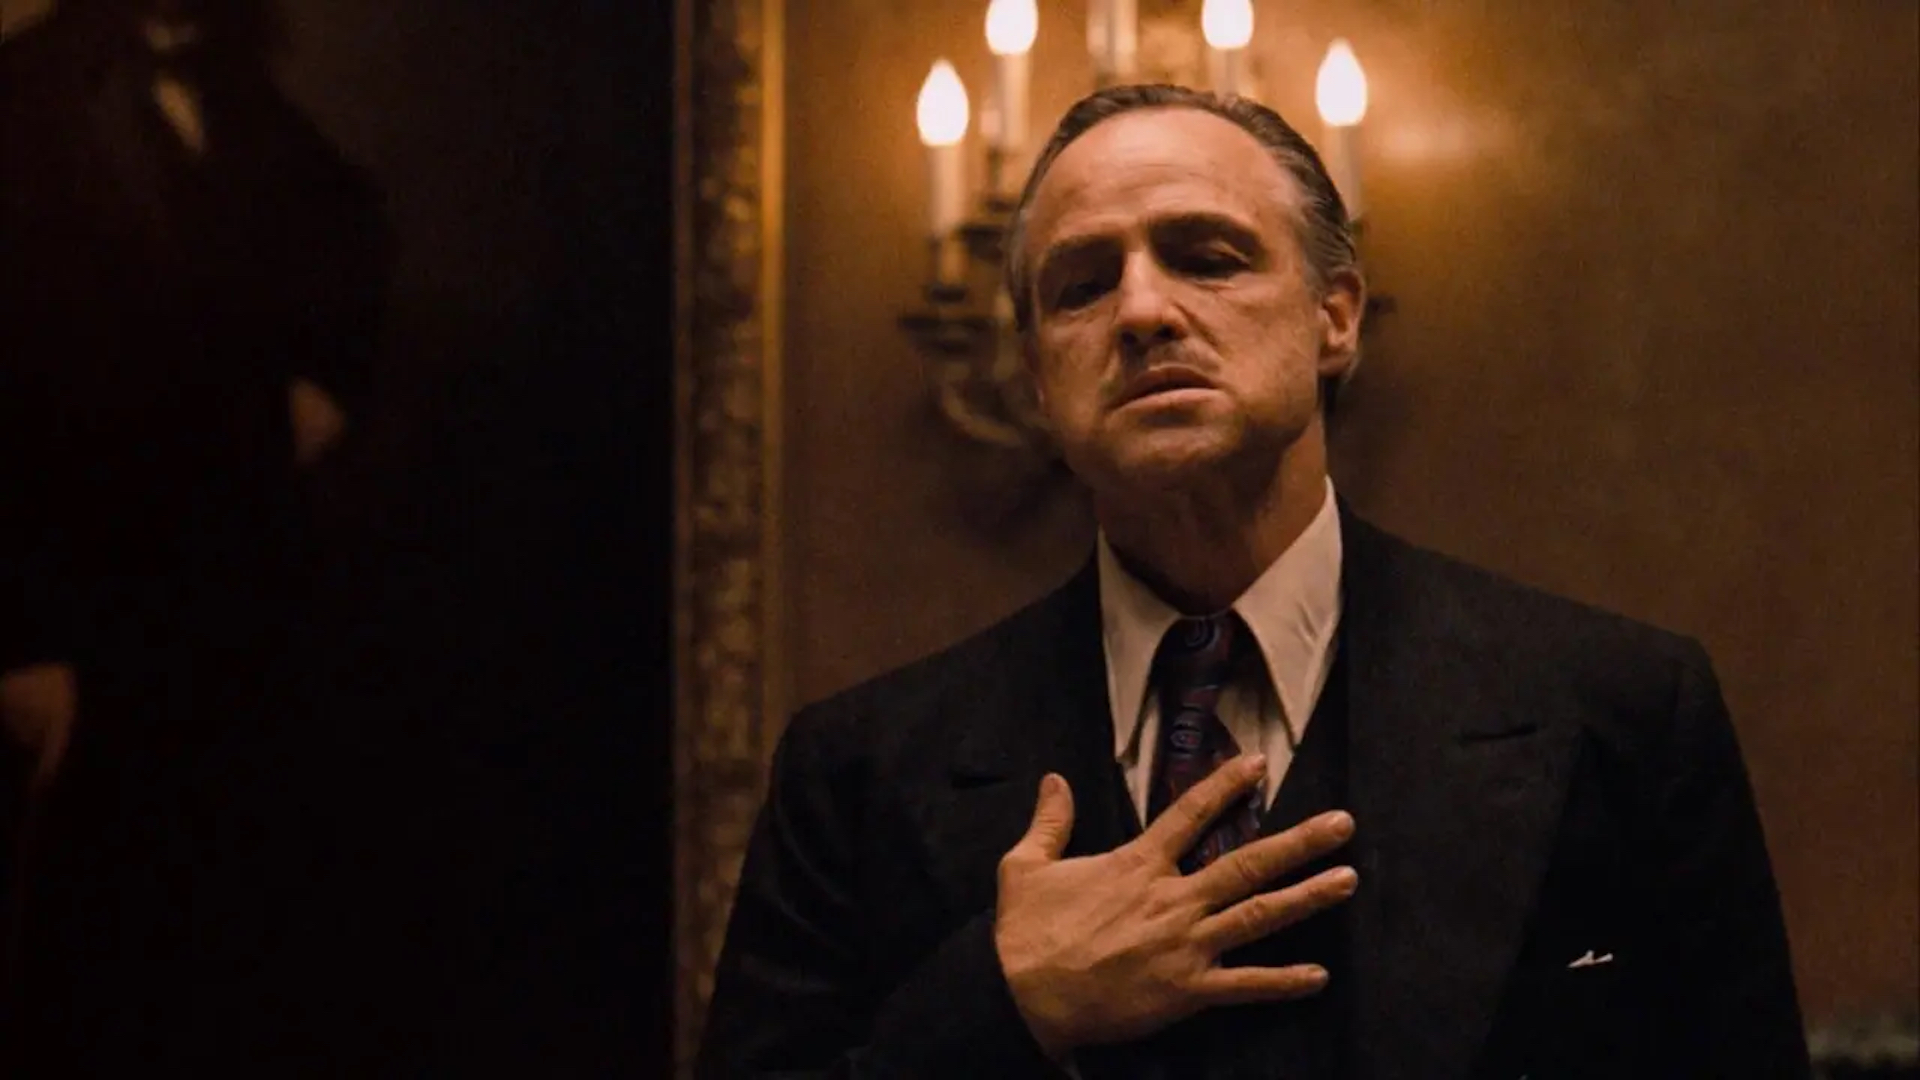 All The Right Movies on X: Today, THE GODFATHER is recorded as